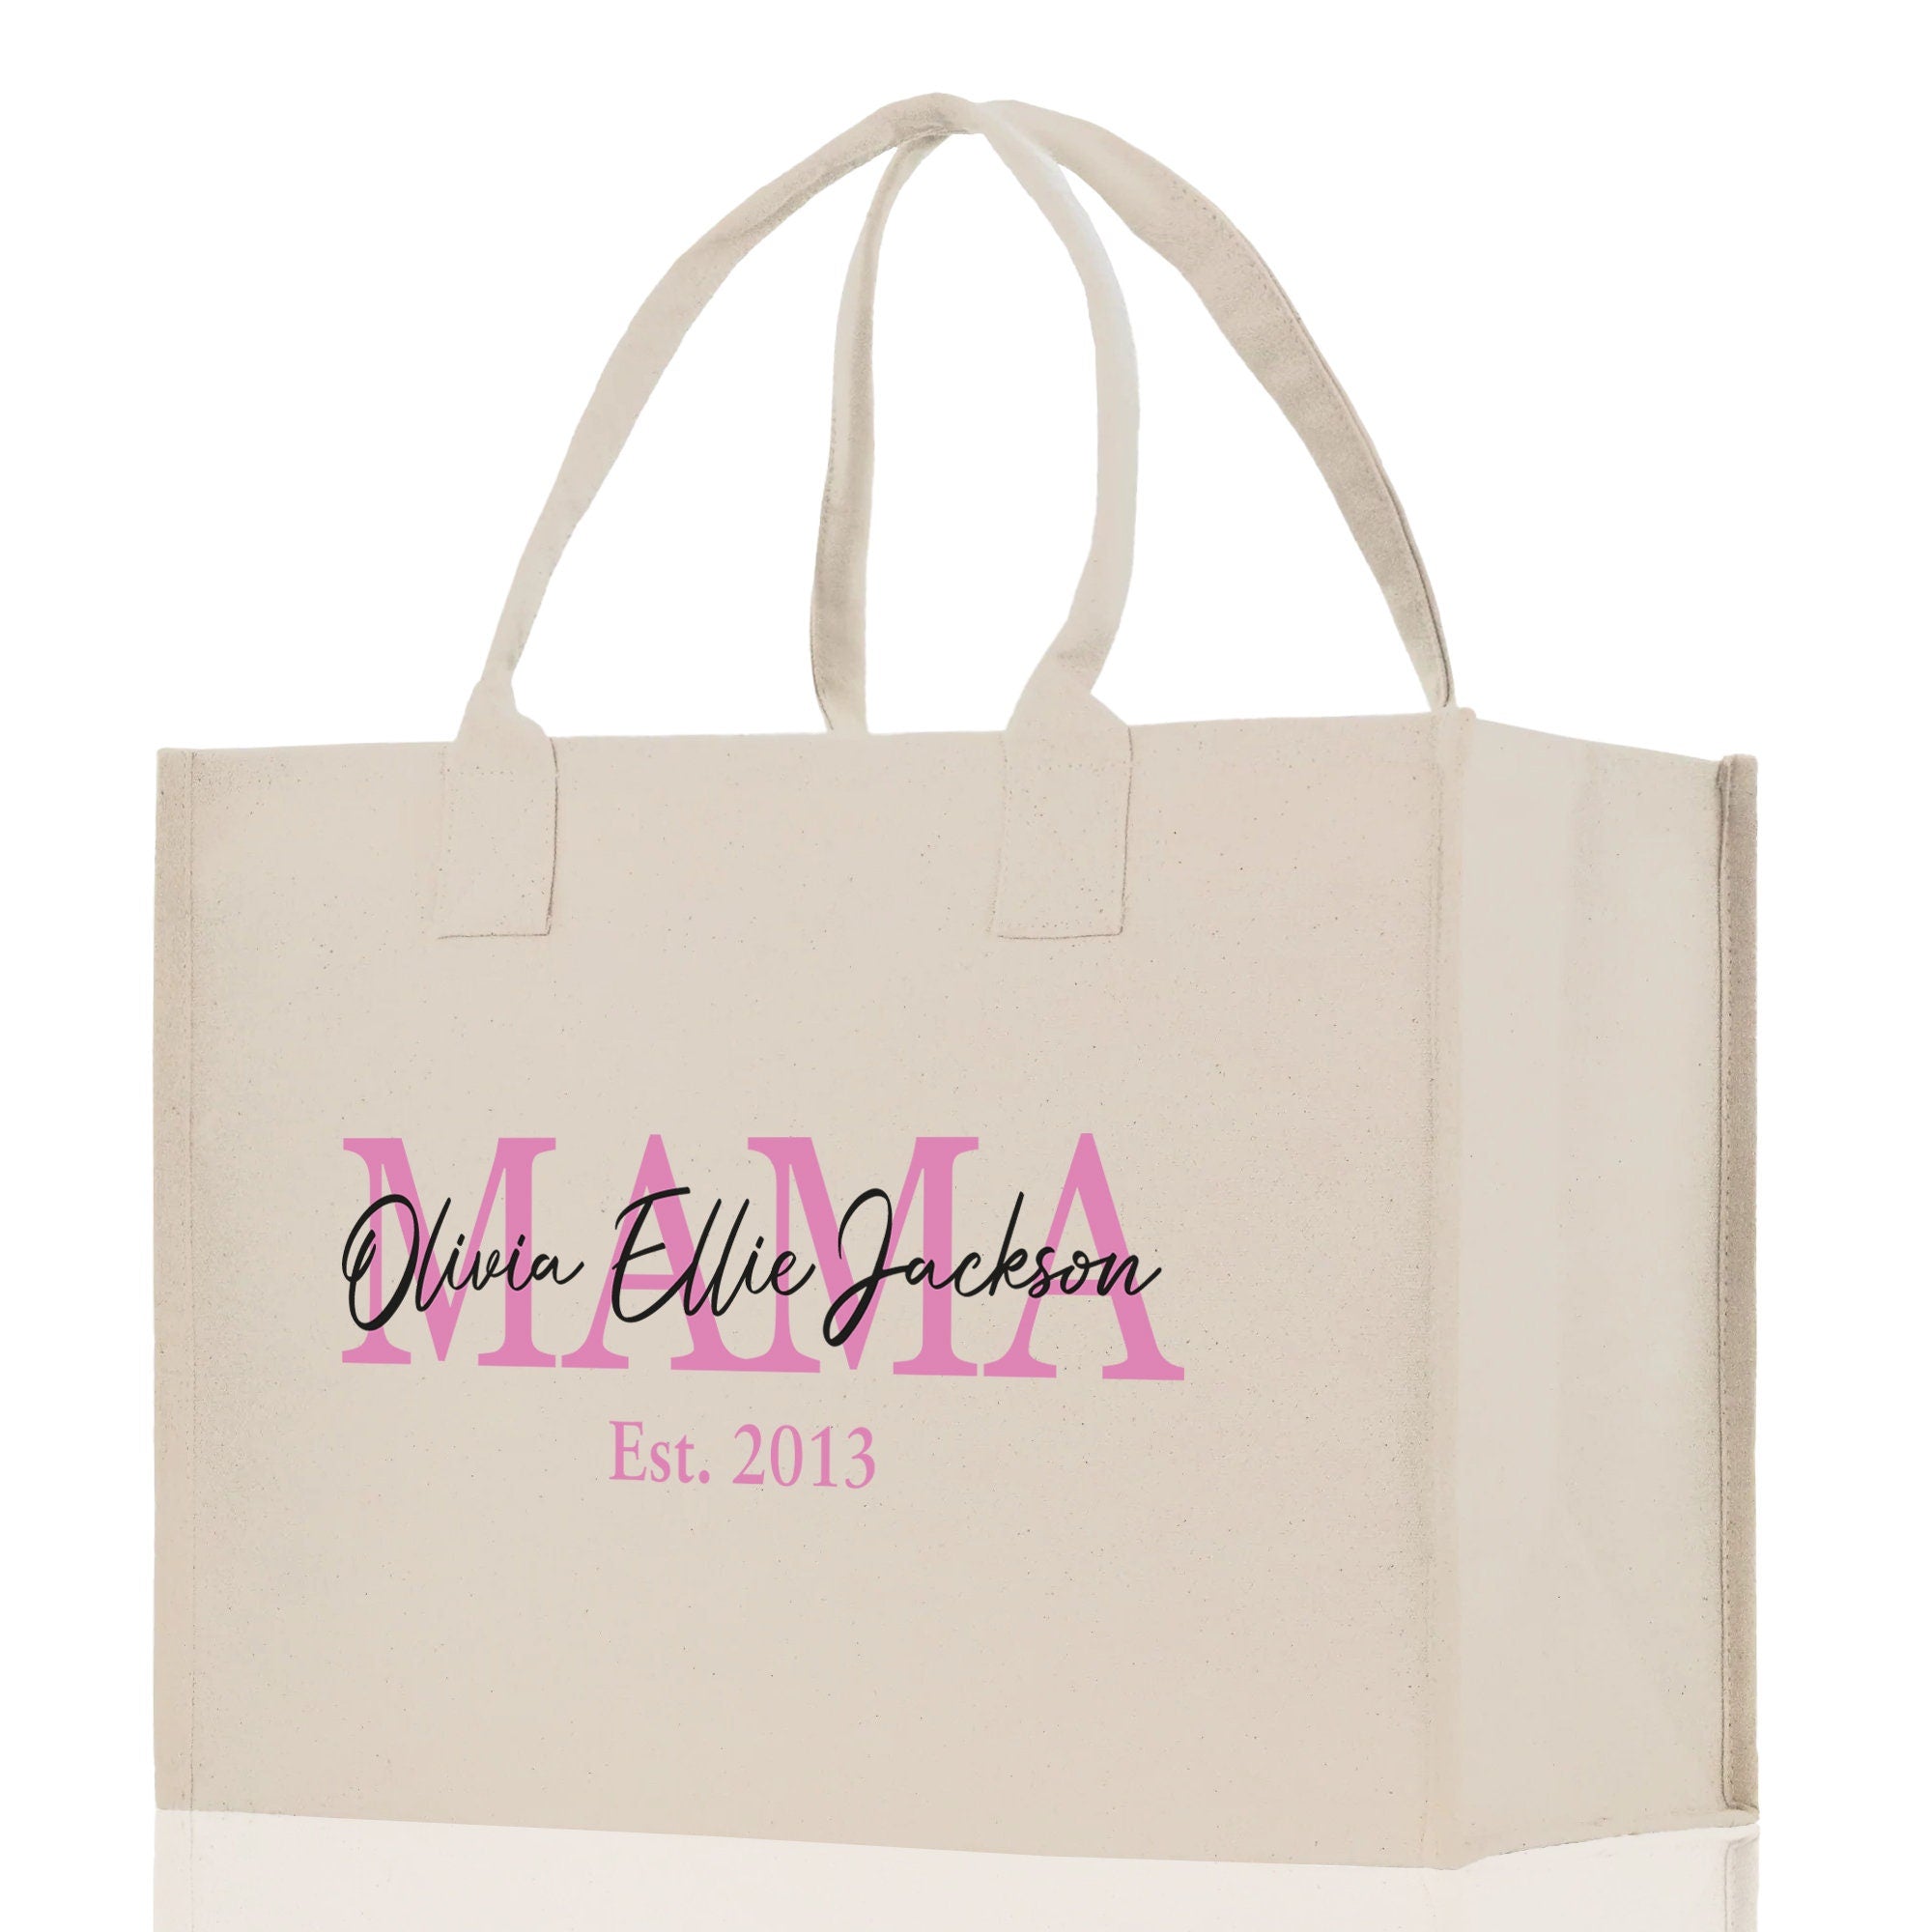 a white shopping bag with a pink logo